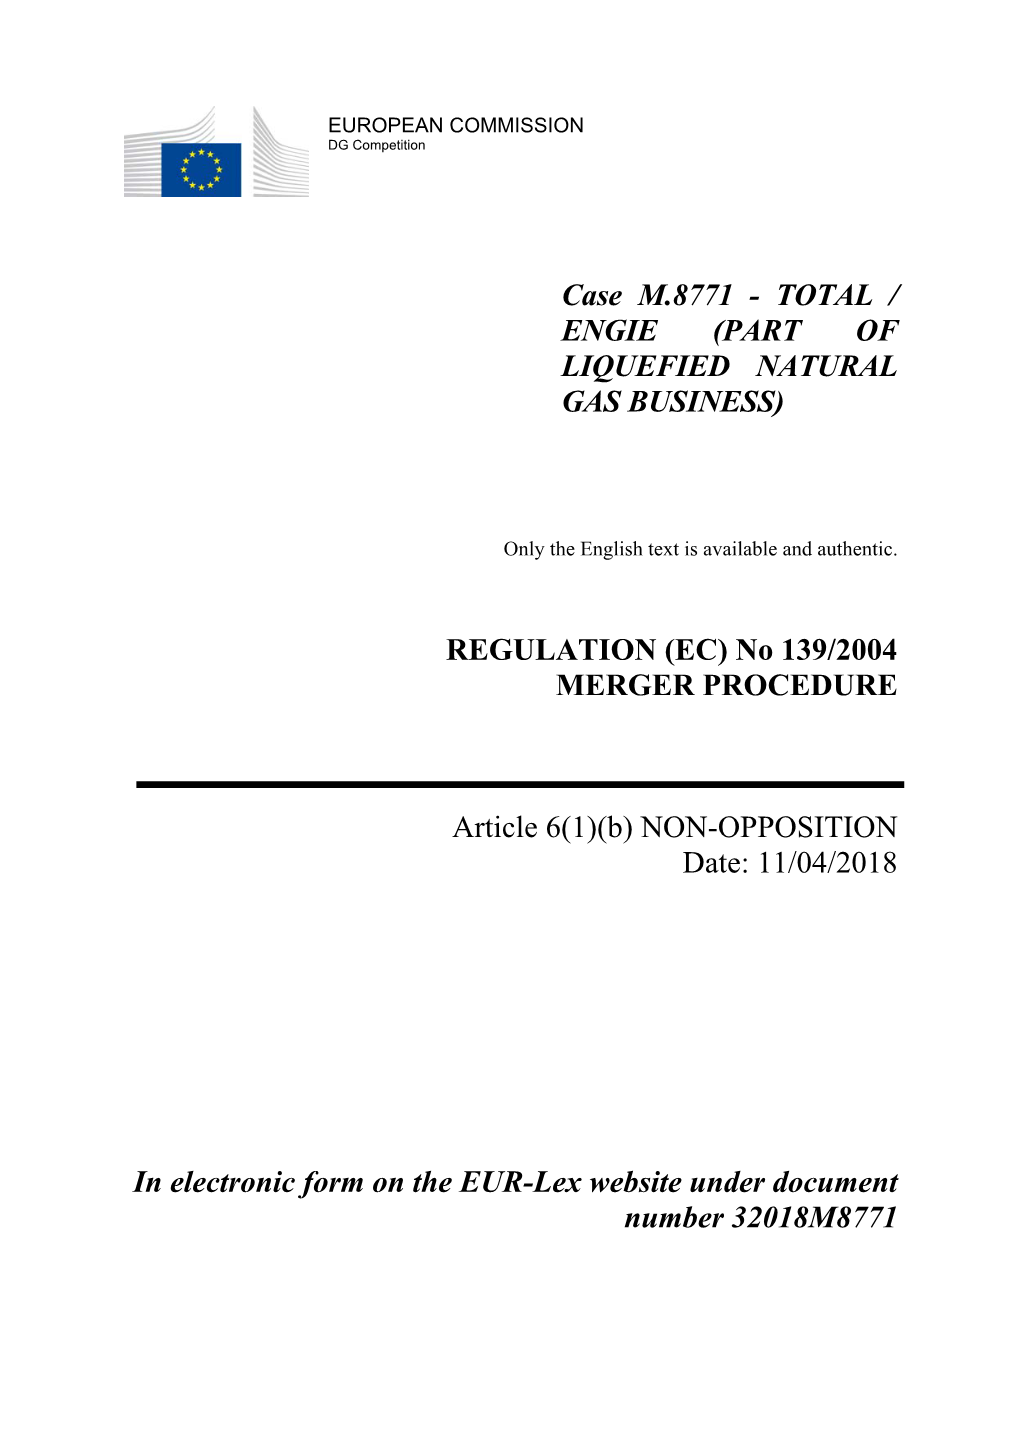 Case M.8771 - TOTAL / ENGIE (PART of LIQUEFIED NATURAL GAS BUSINESS)